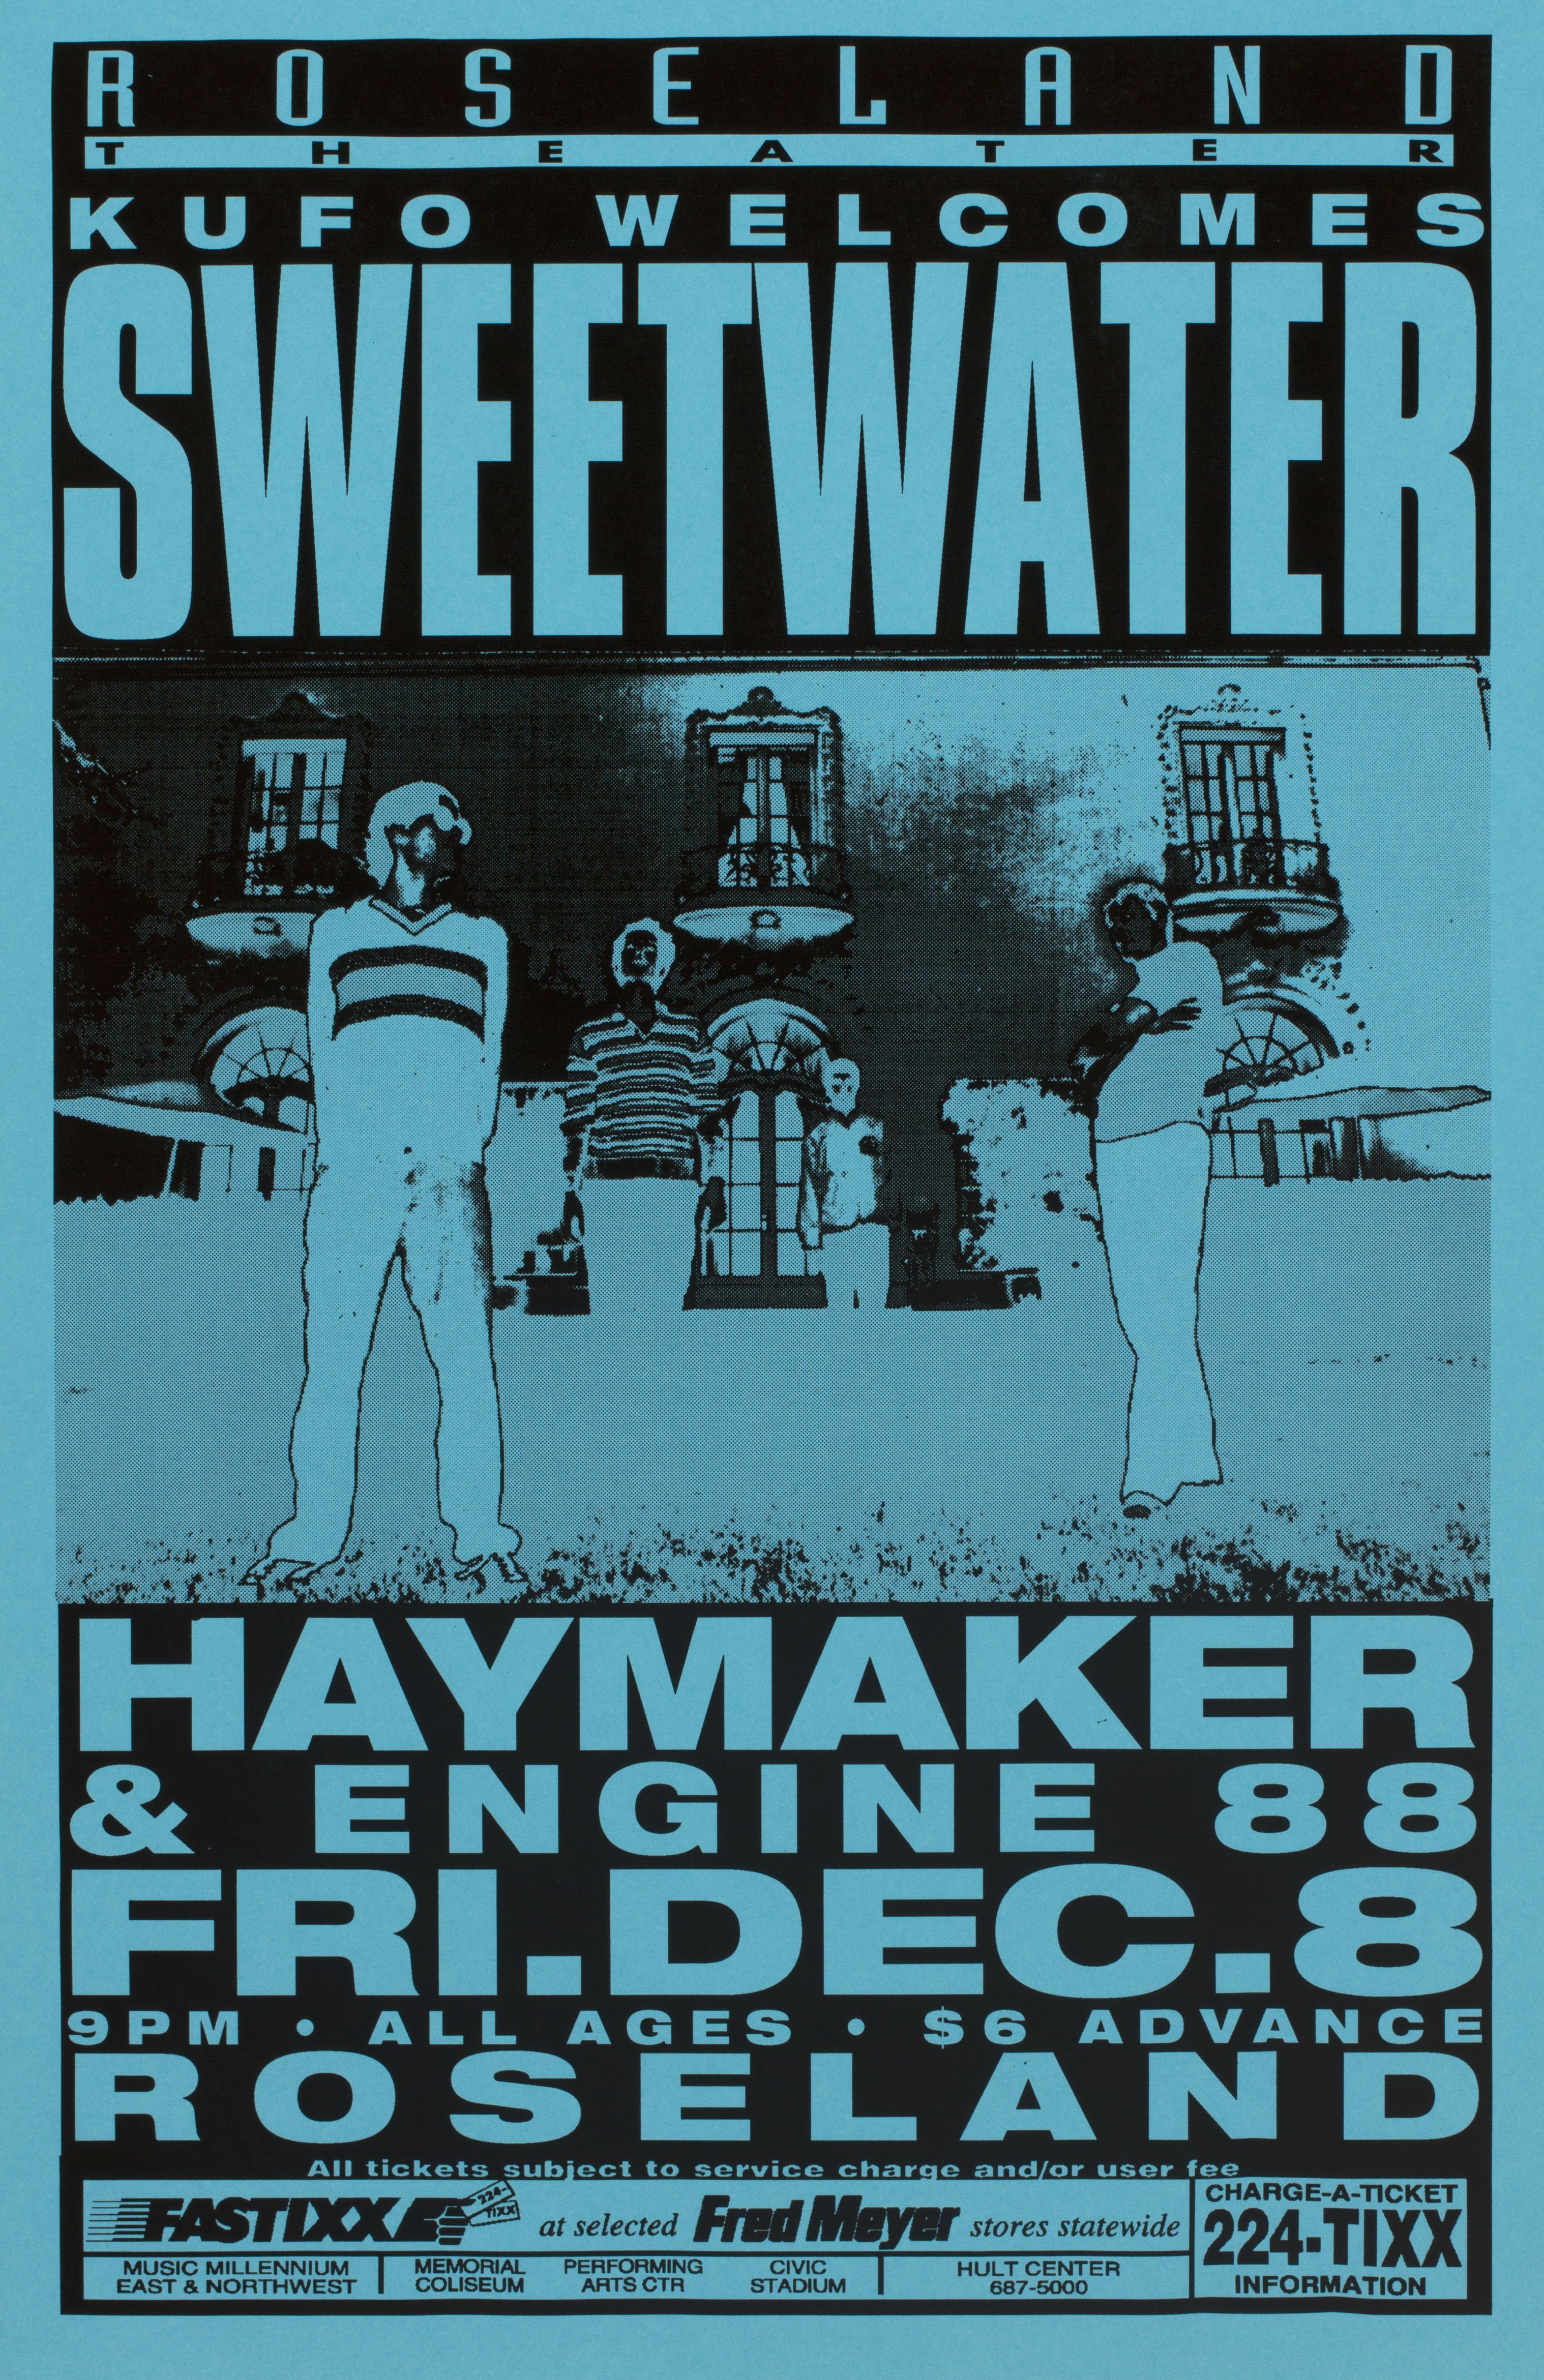 MXP-83.2 Sweetwater 1995 Roseland Theater  Dec 8 Concert Poster